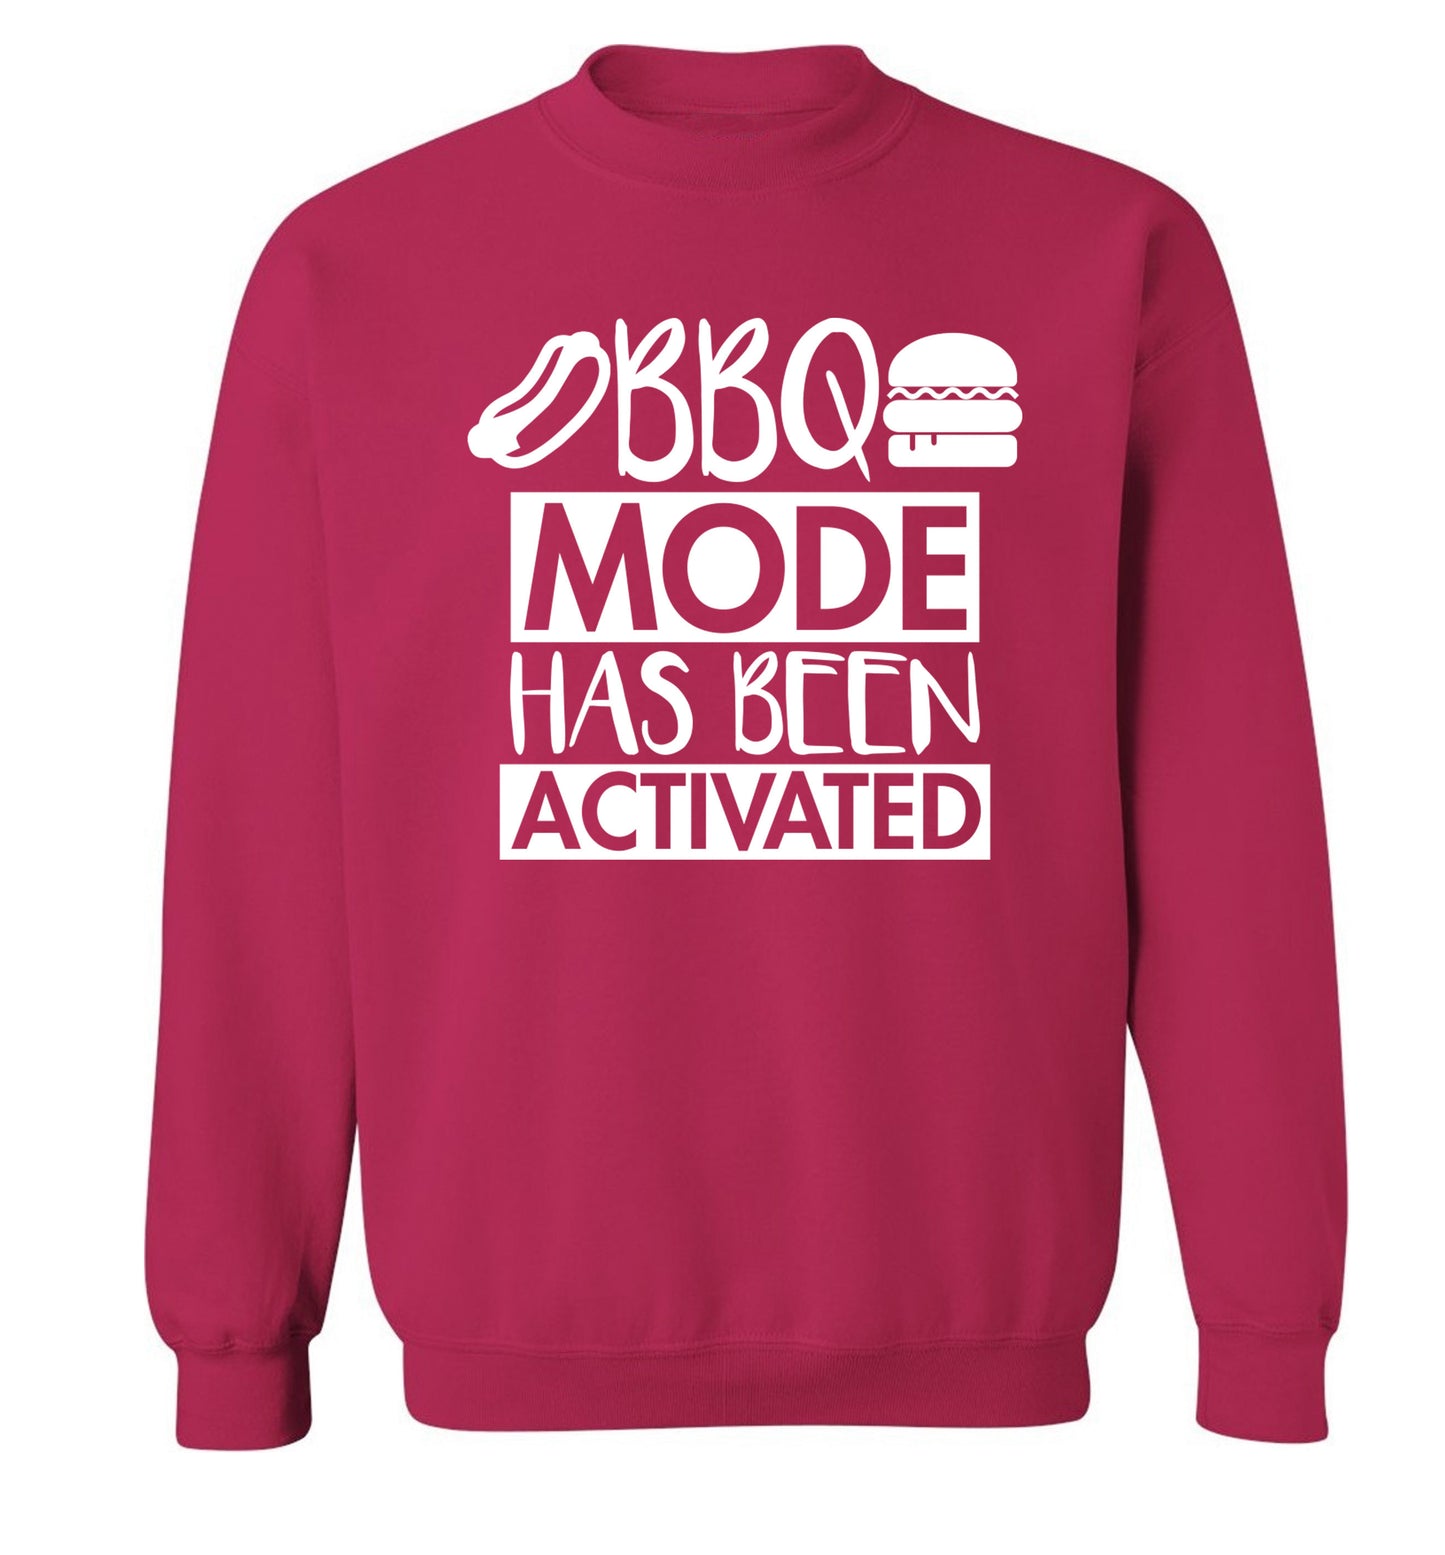 Bbq mode has been activated Adult's unisex pink Sweater 2XL